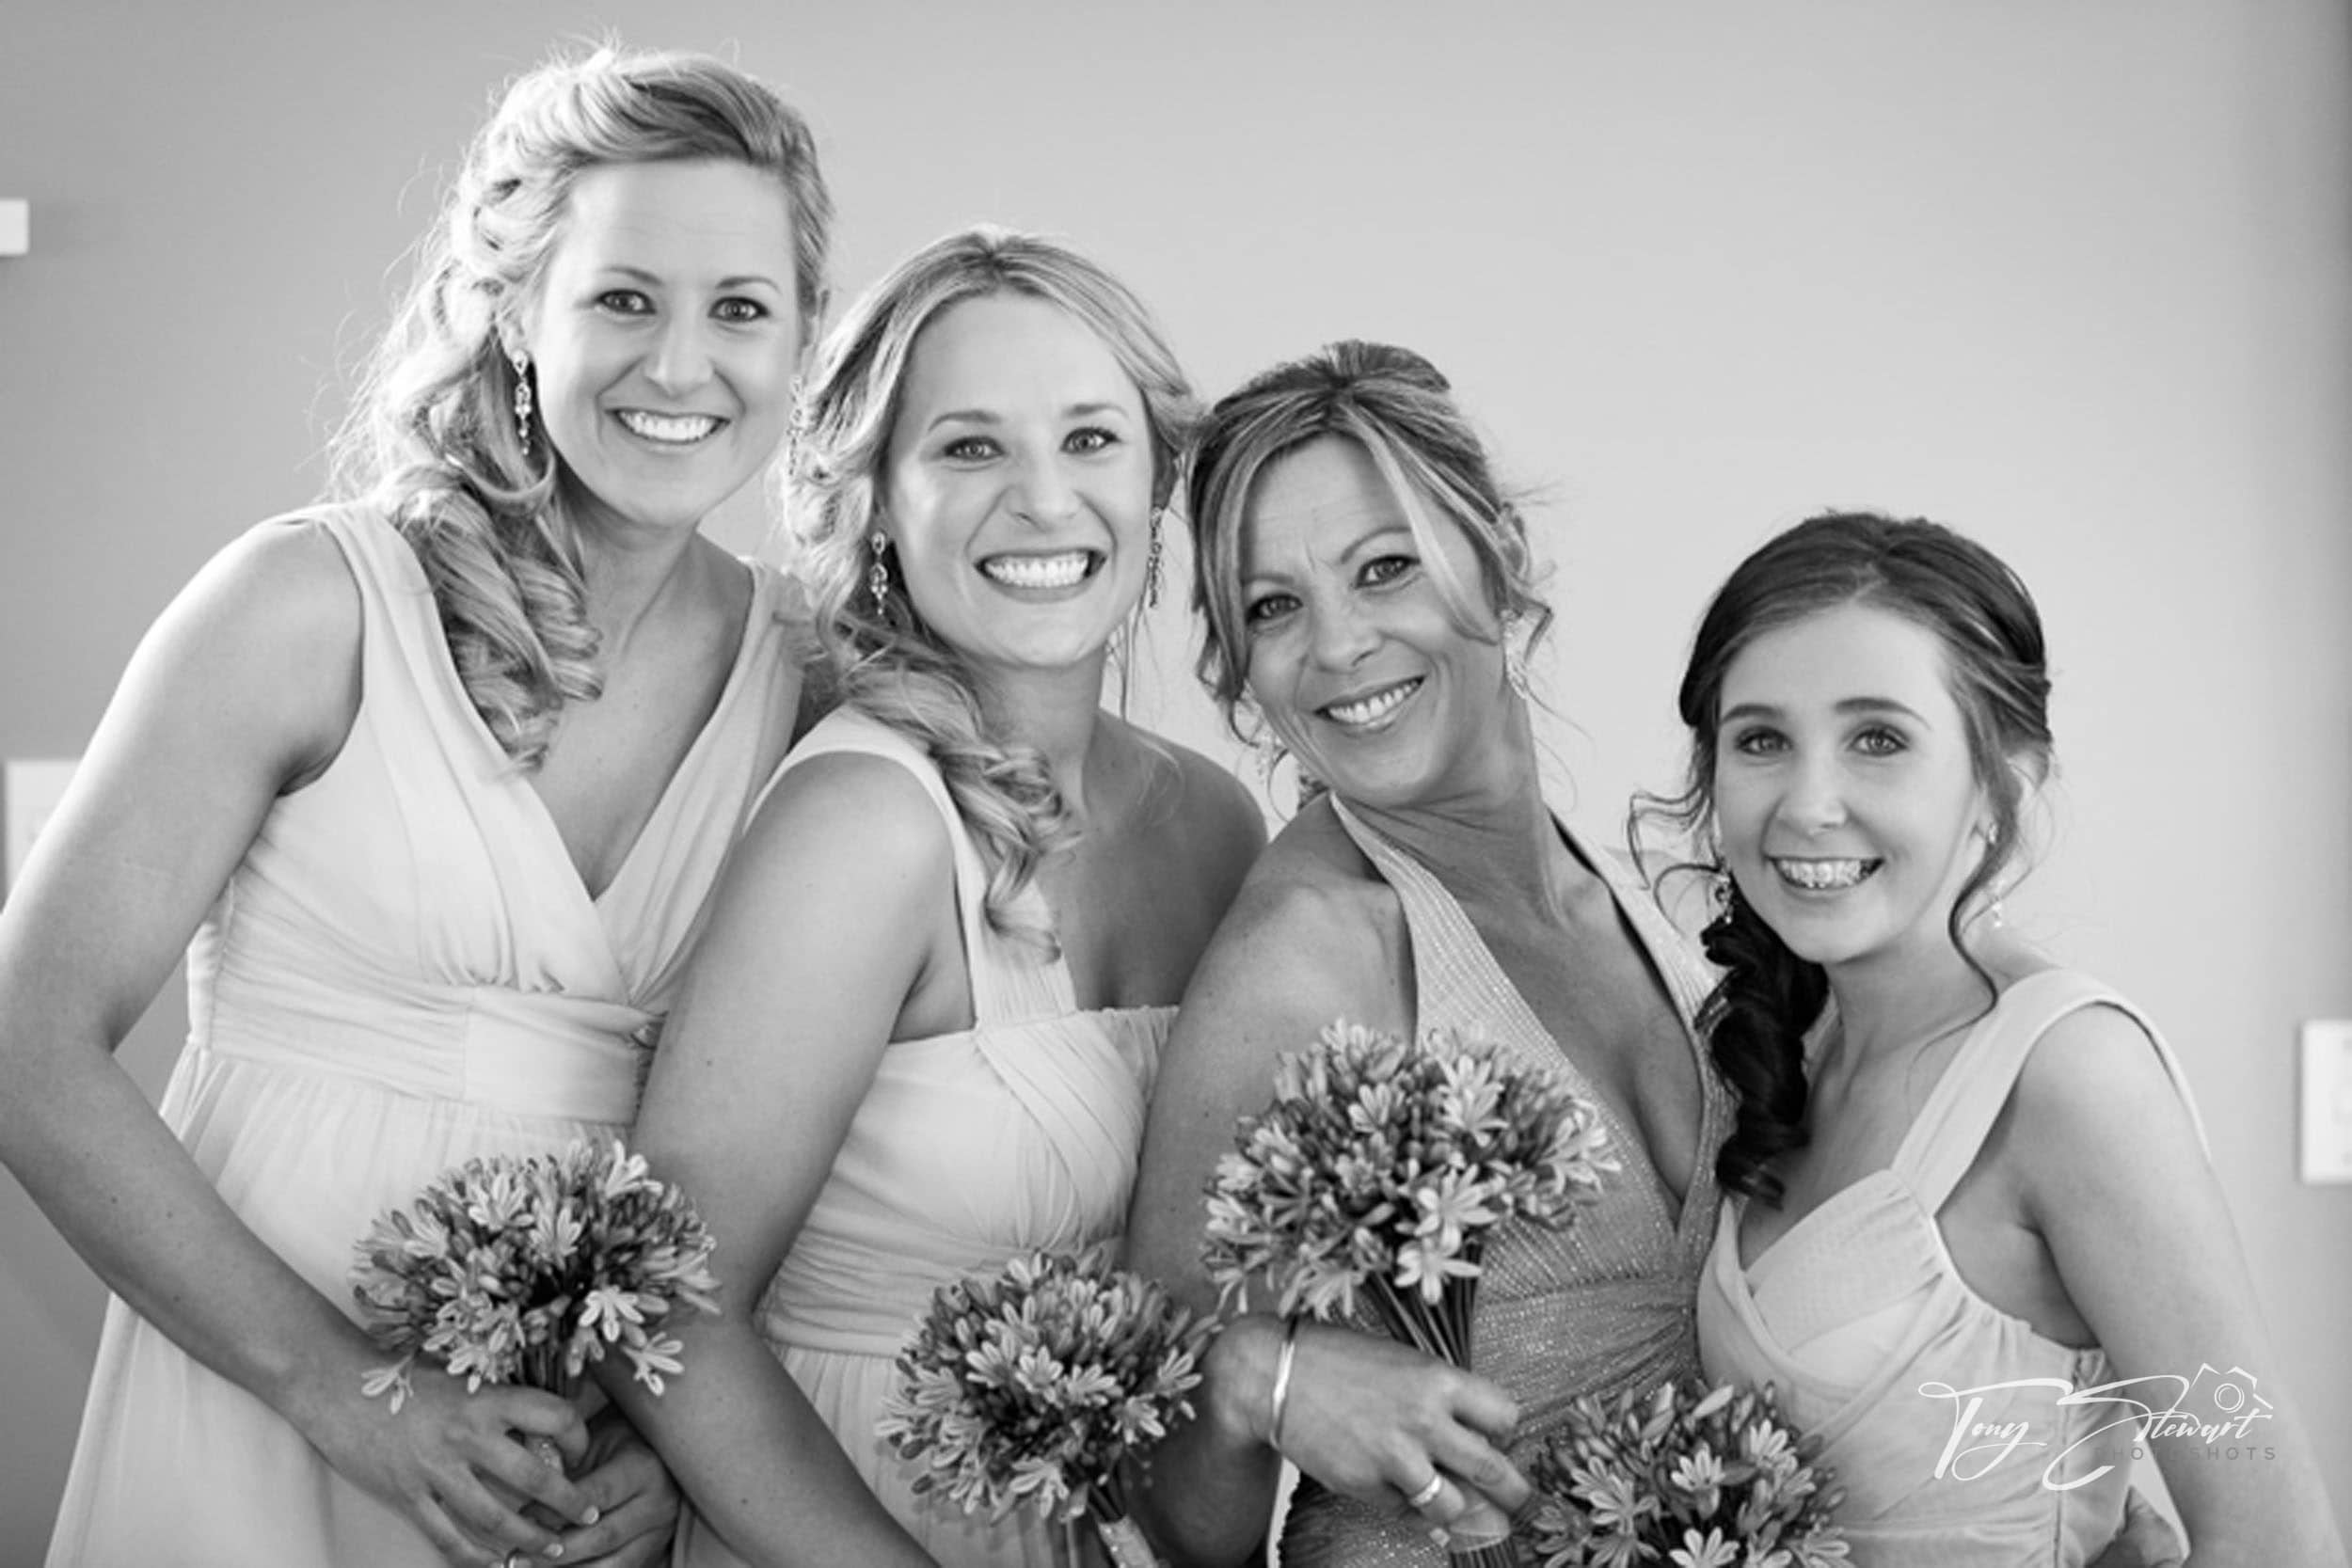 Bridesmaids pose together with their Mum, before leaving for their Mum's wedding ceremony.